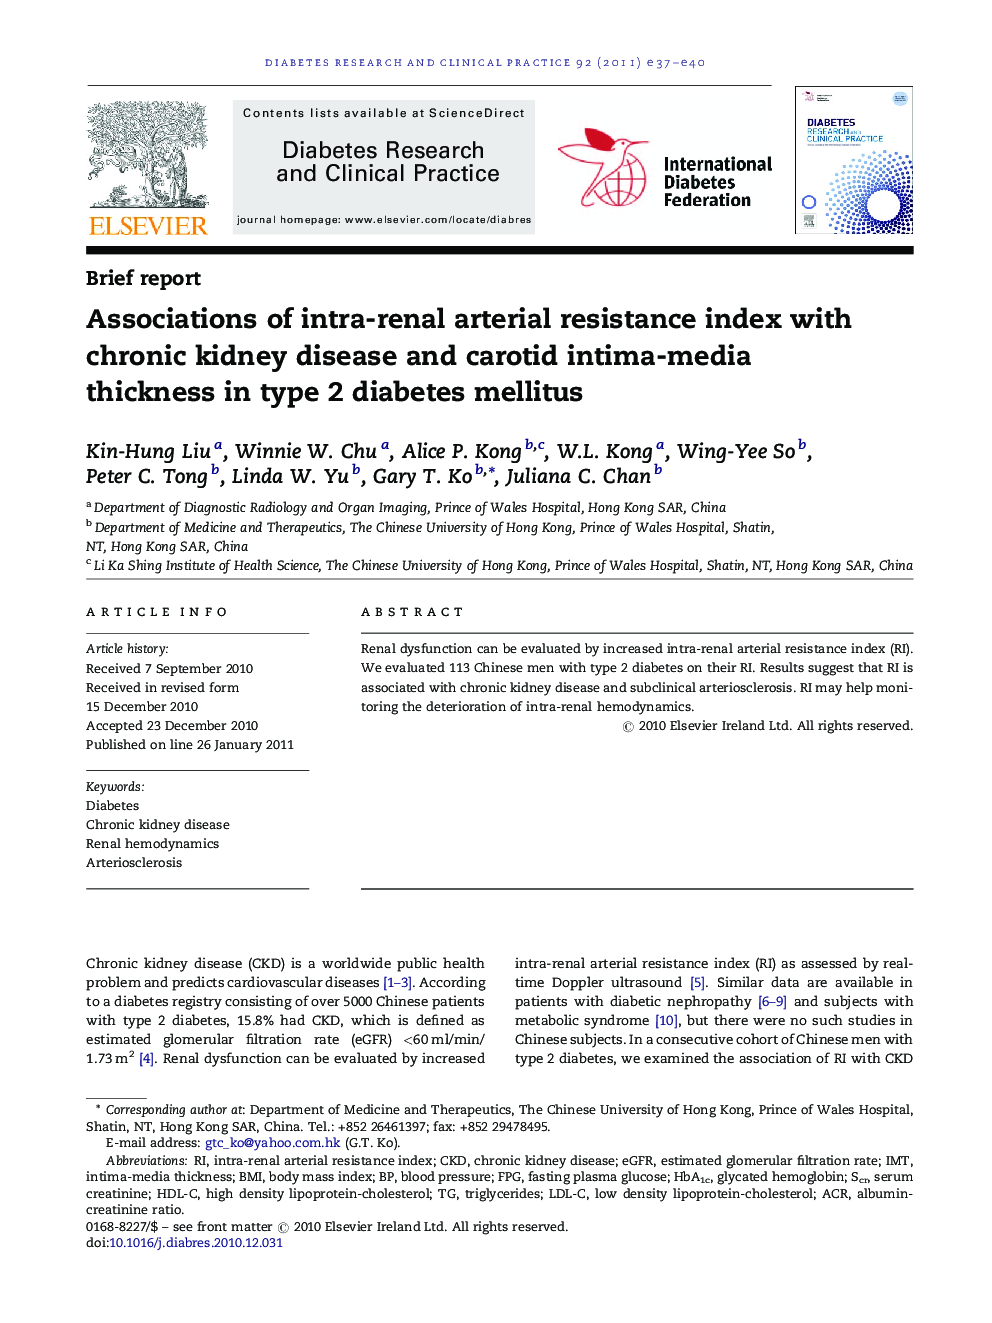 Associations of intra-renal arterial resistance index with chronic kidney disease and carotid intima-media thickness in type 2 diabetes mellitus